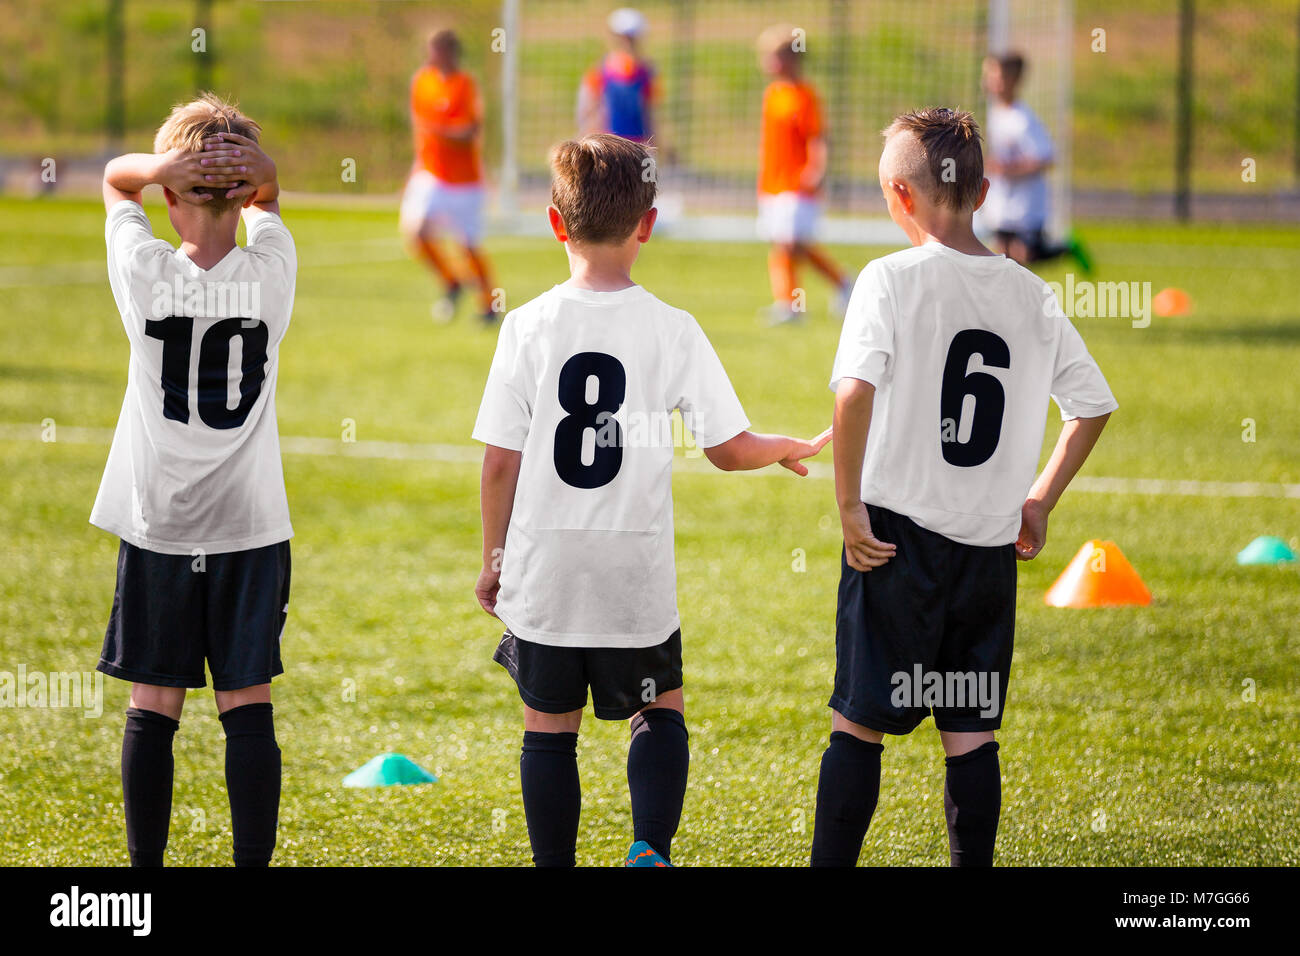 Children Football Team. Young Boys Watching Soccer Match. Football Tournament Competition in the Background. KidsFootball Team Players on Summer Sport Stock Photo